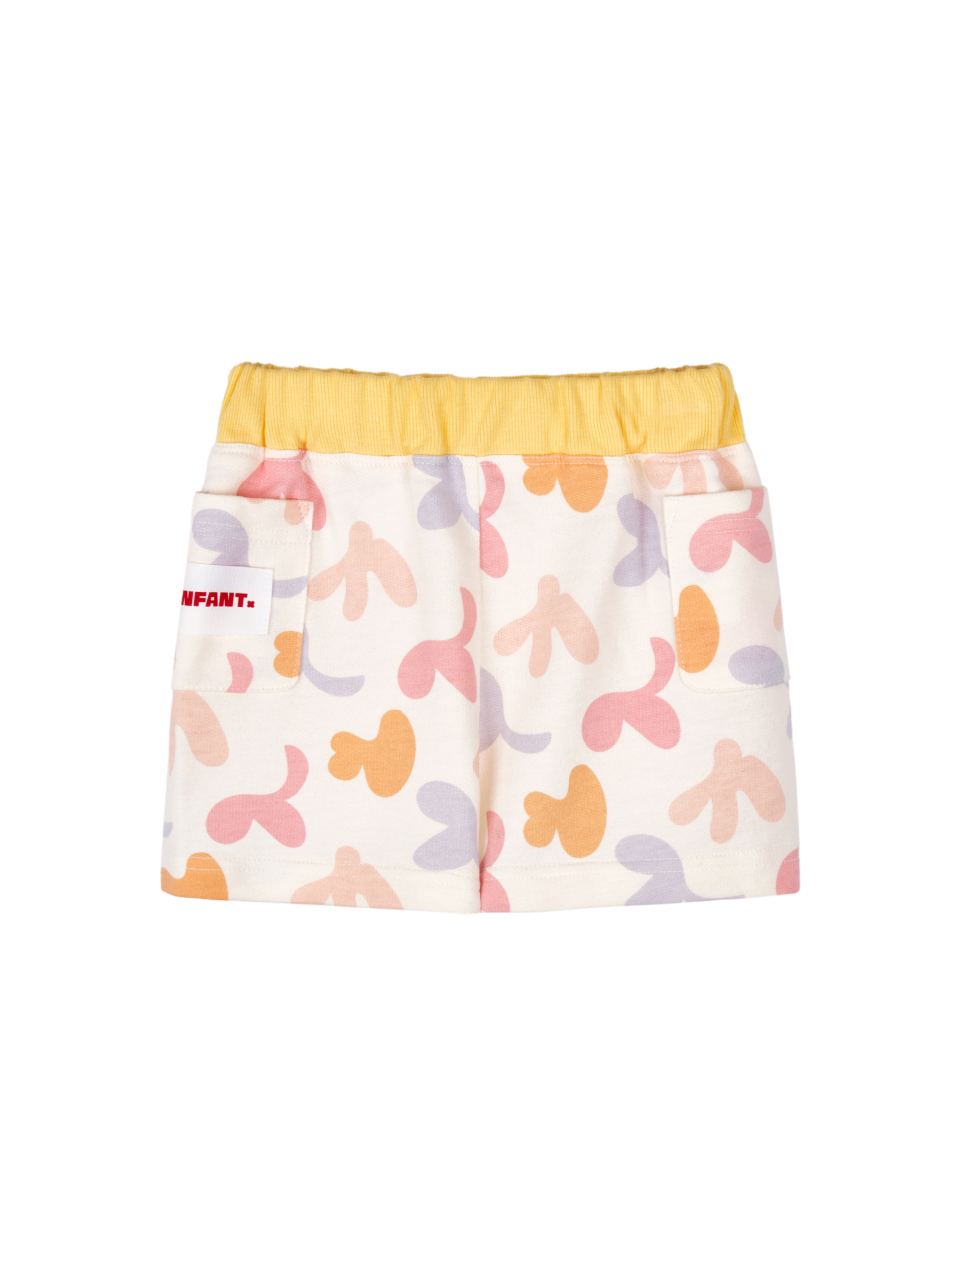 Sprout Half Shorts - Ivory